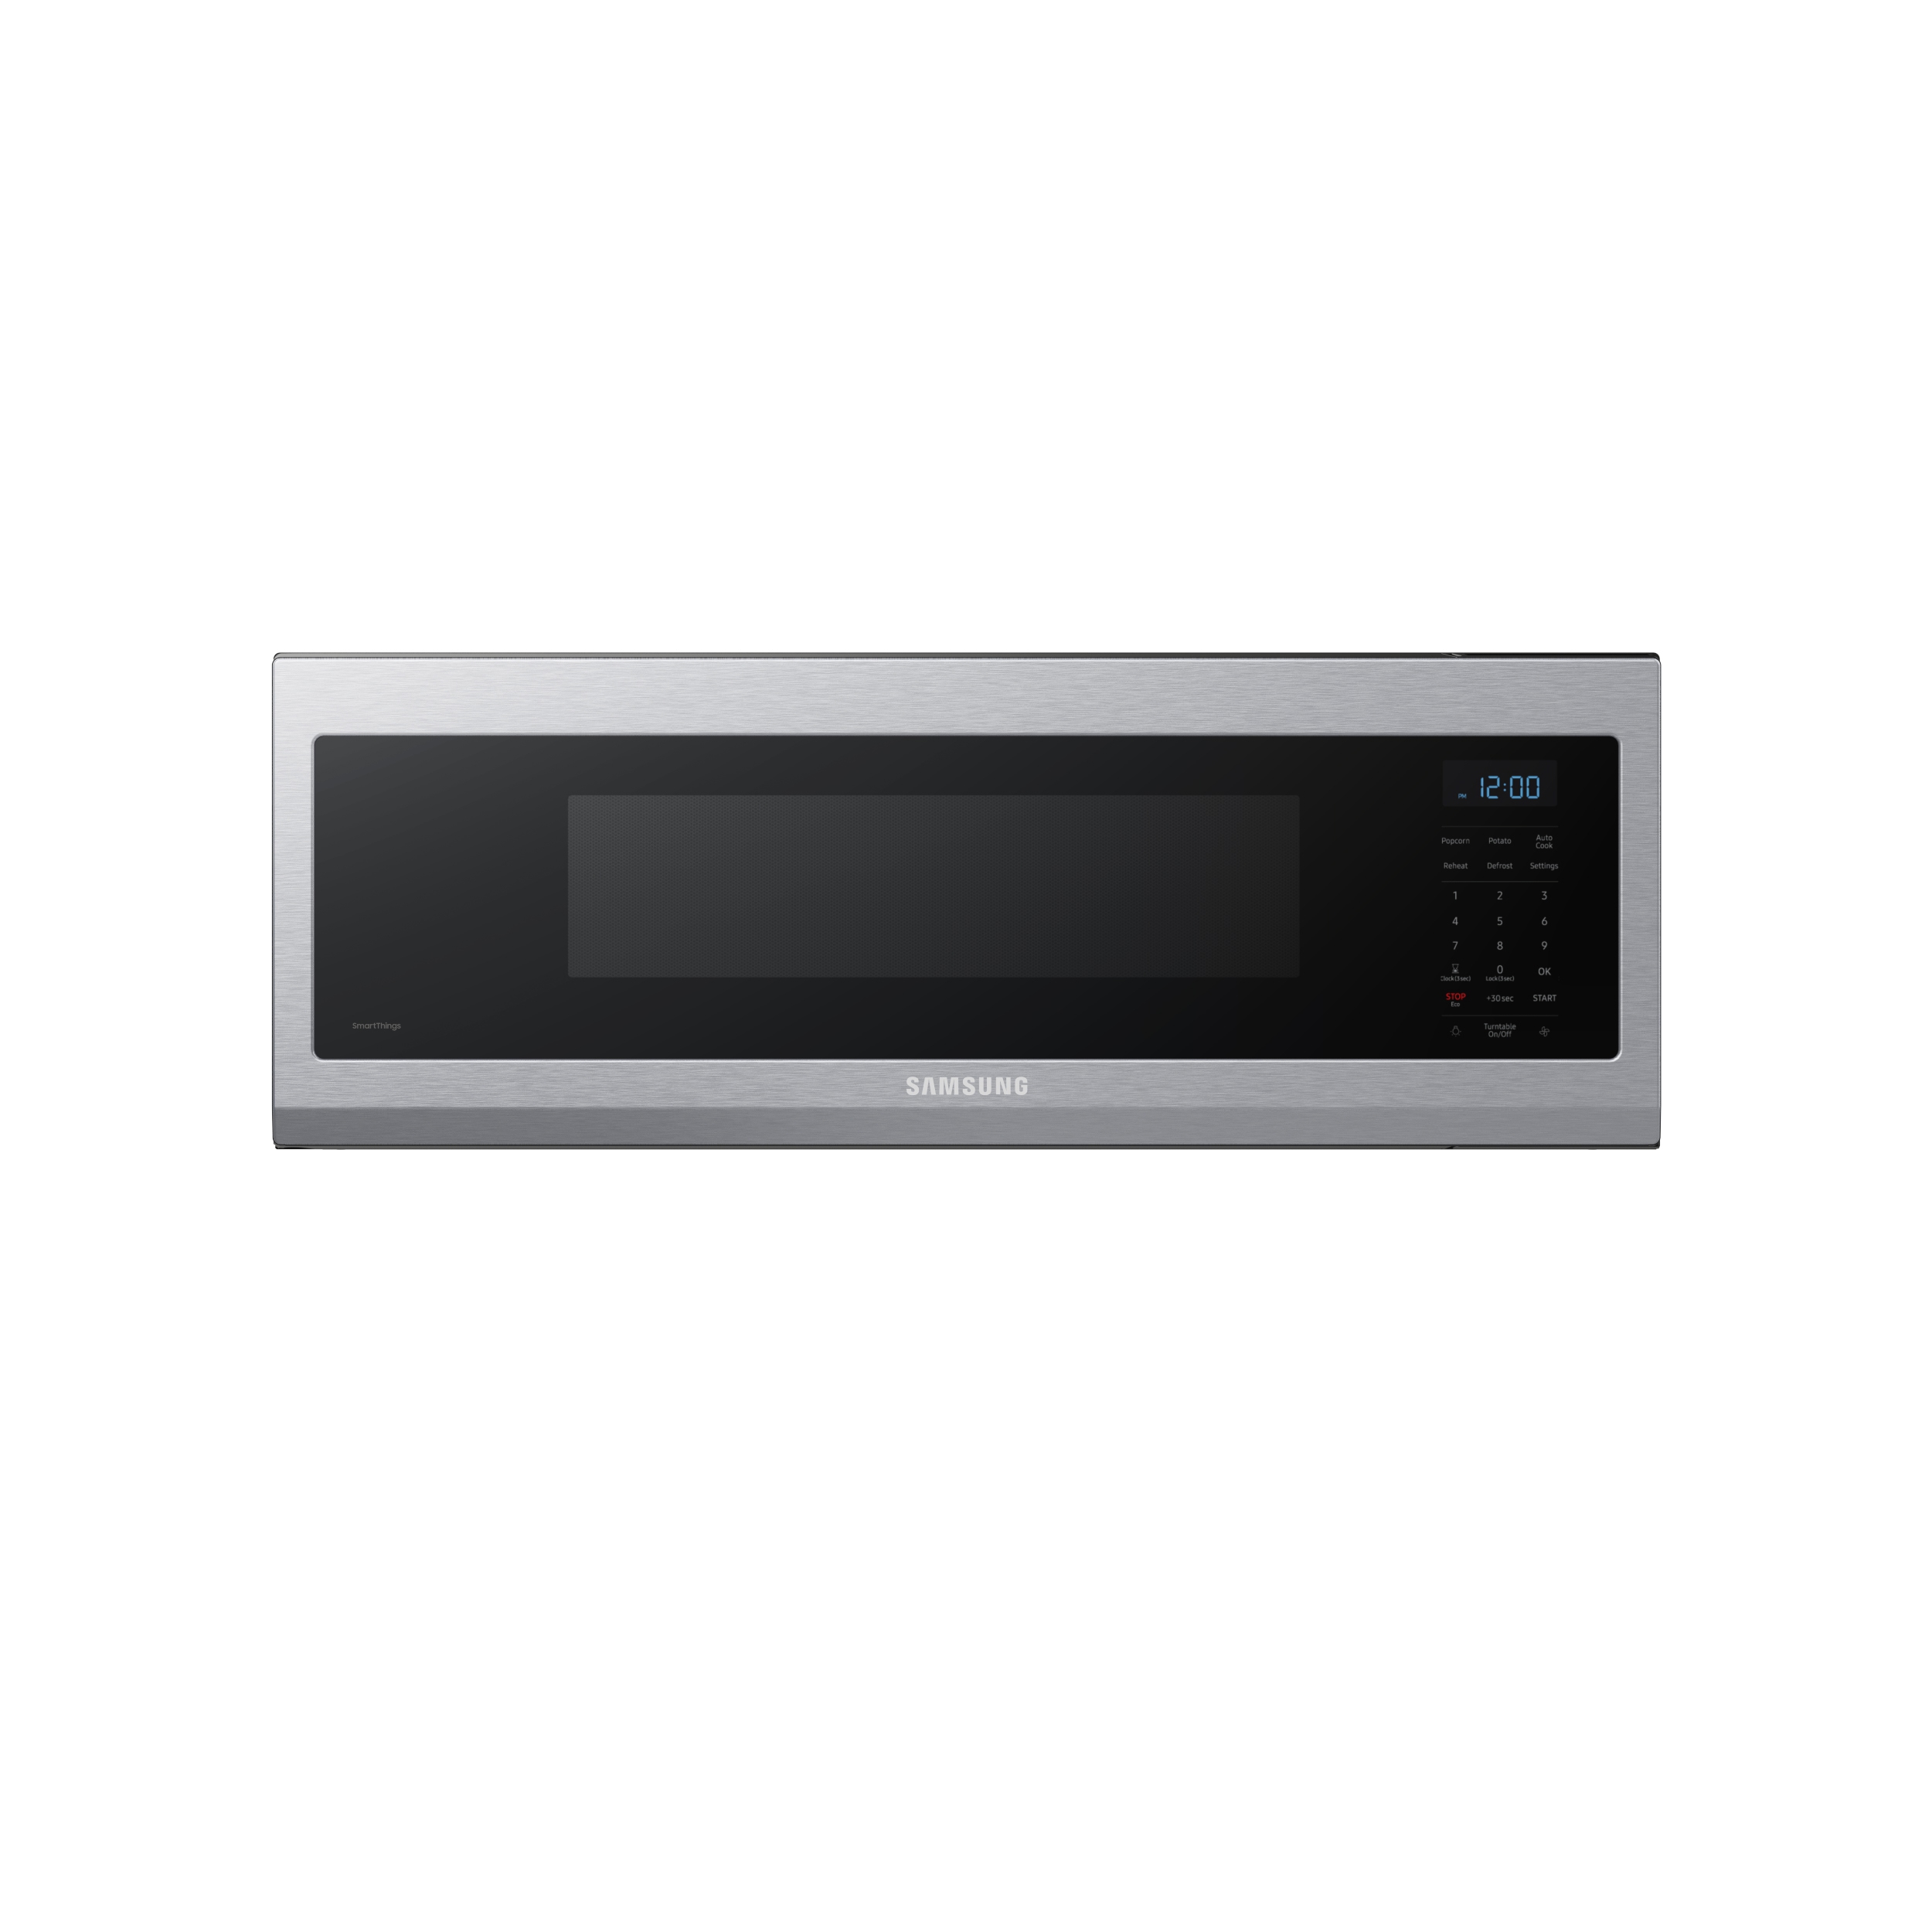 https://image-us.samsung.com/SamsungUS/home/home-appliances/microwaves/pdp/me11a7510ds-aa/gallery/360/ME11A7510DS-01.jpg?$product-details-jpg$